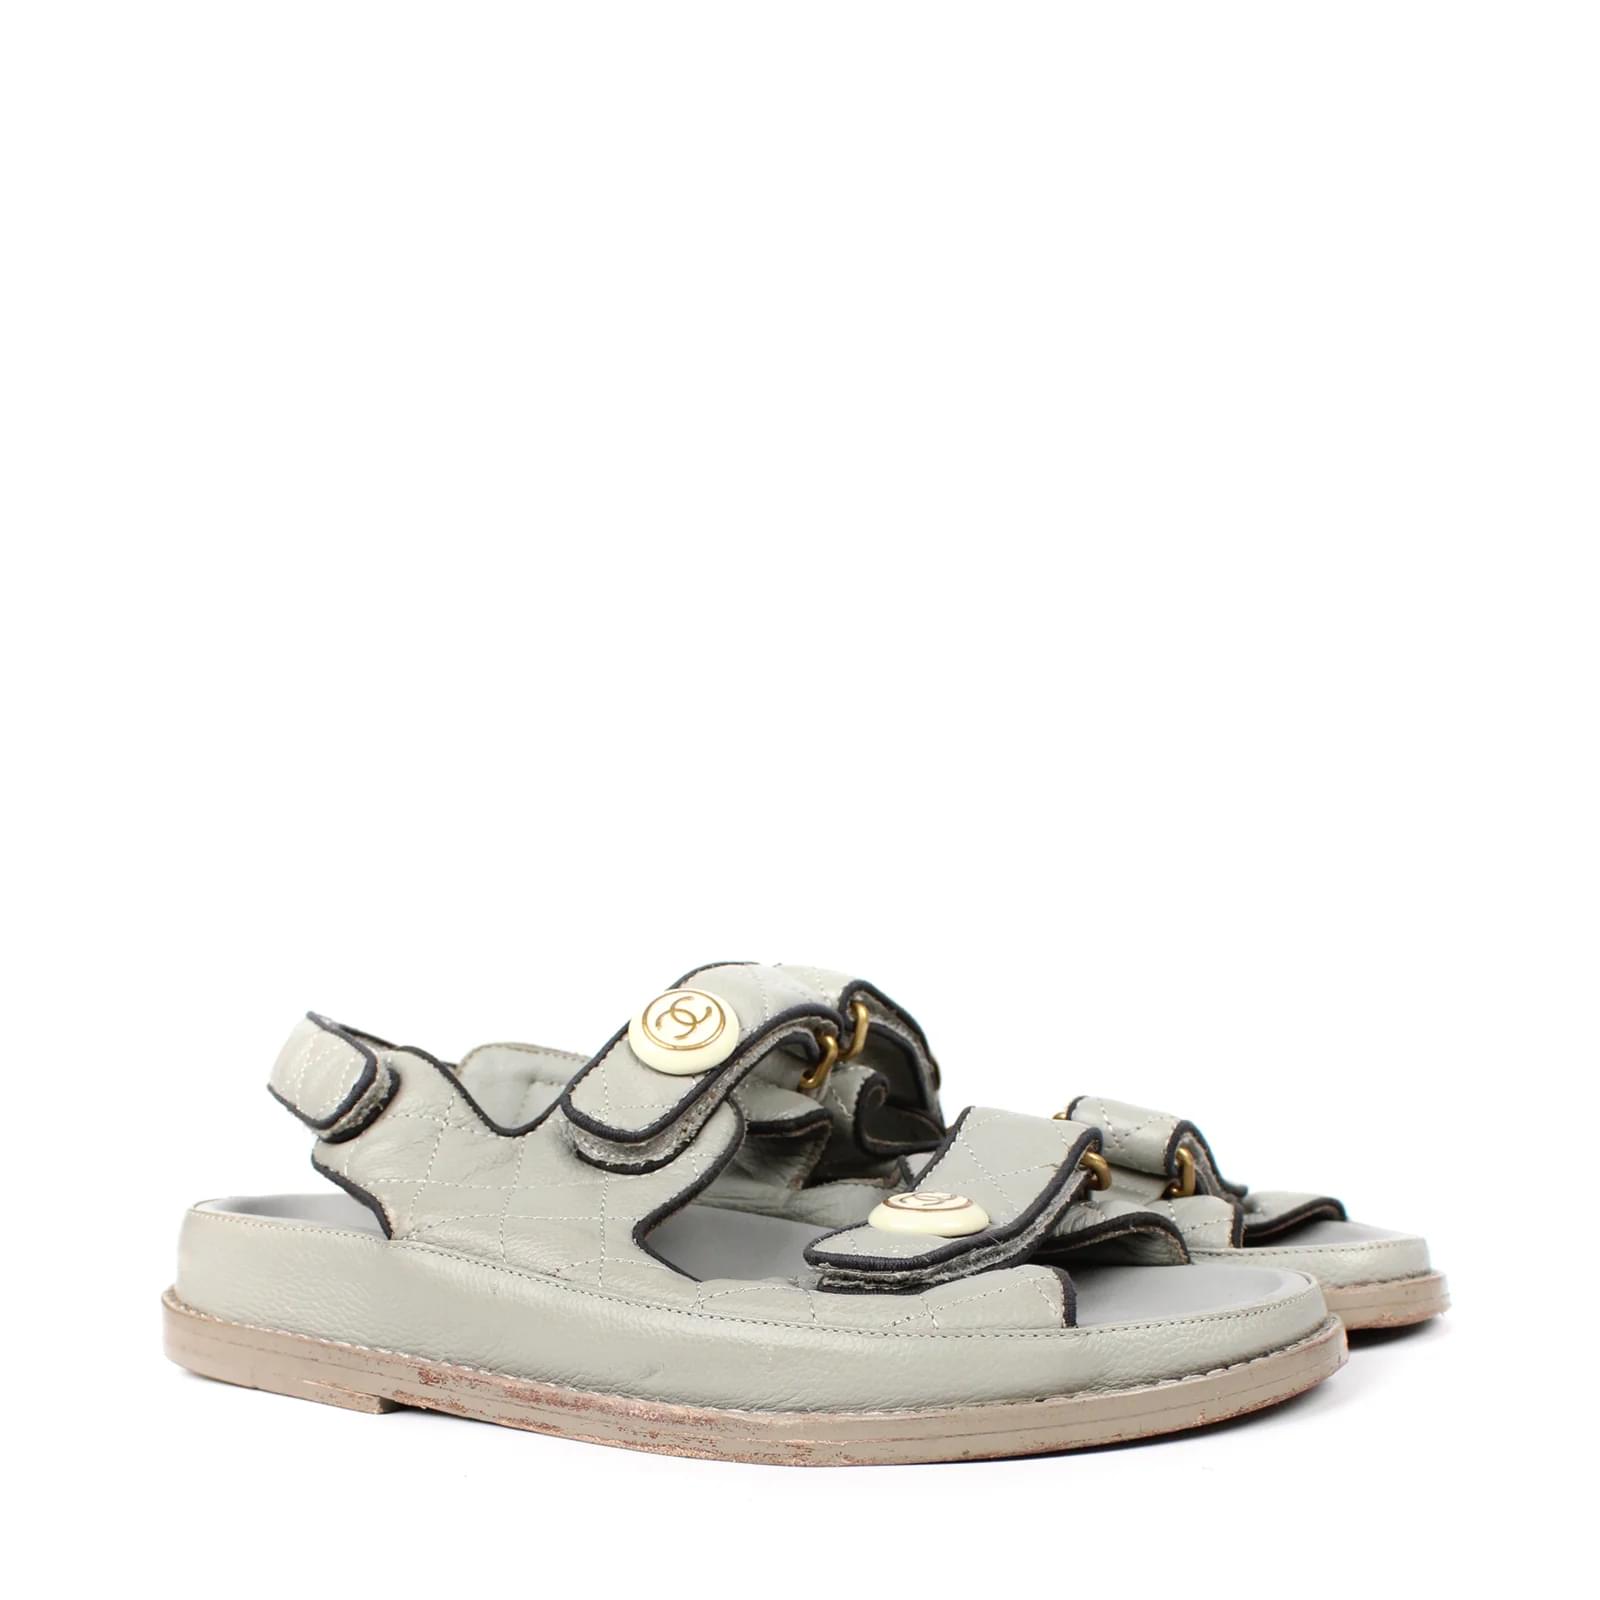 Dad sandals leather sandal Chanel White size 38 EU in Leather